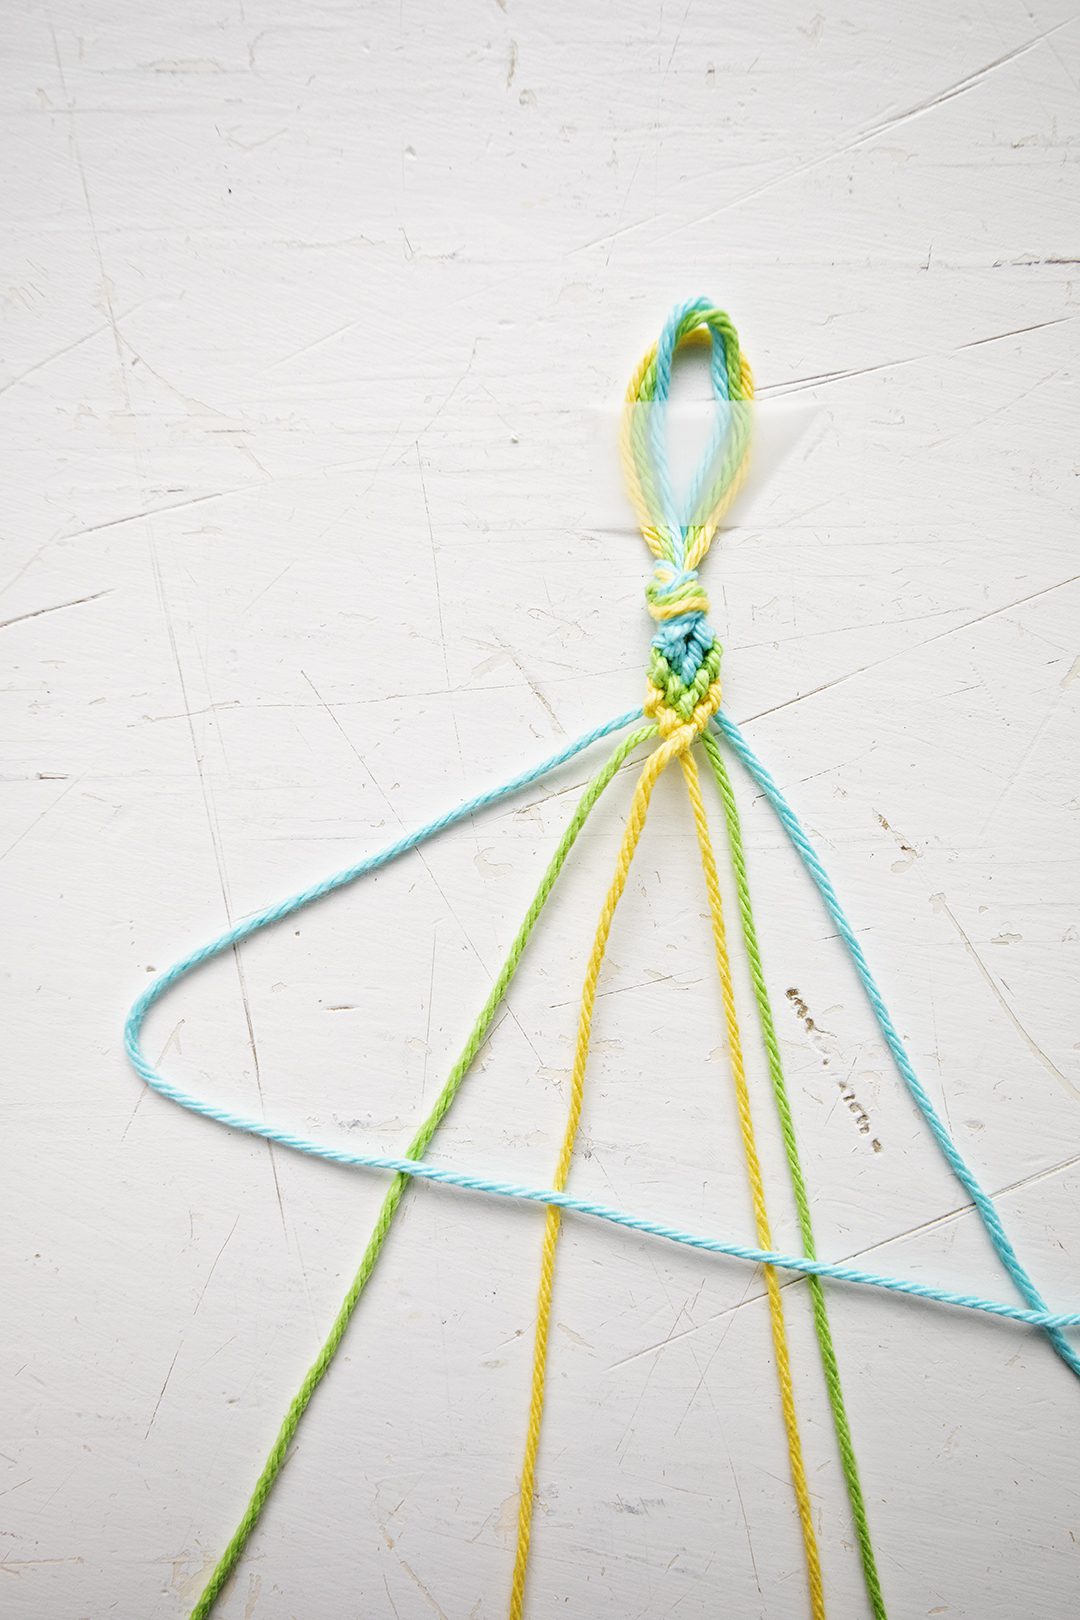 A chevron pattern bracelet being made from blue, green, and yellow string.